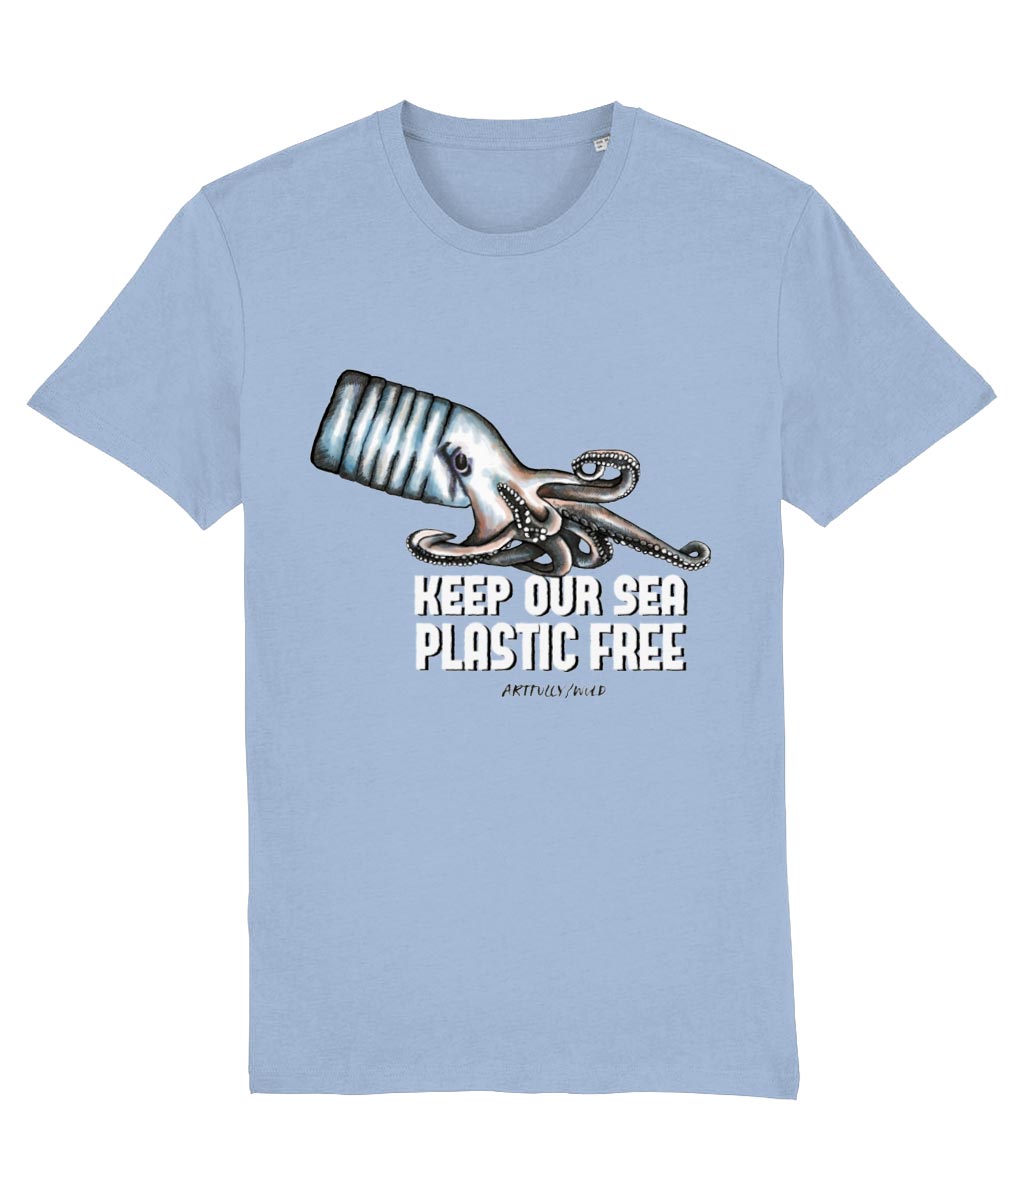 'OCTOPUS BOTTLE – KEEP OUR SEA PLASTIC FREE' Print on Sky Blue Sustainable T-Shirt. Unisex/Women/Men. Certified Organic Clothing. Original Illustration by Artfully/Wild. Printed in the UK.